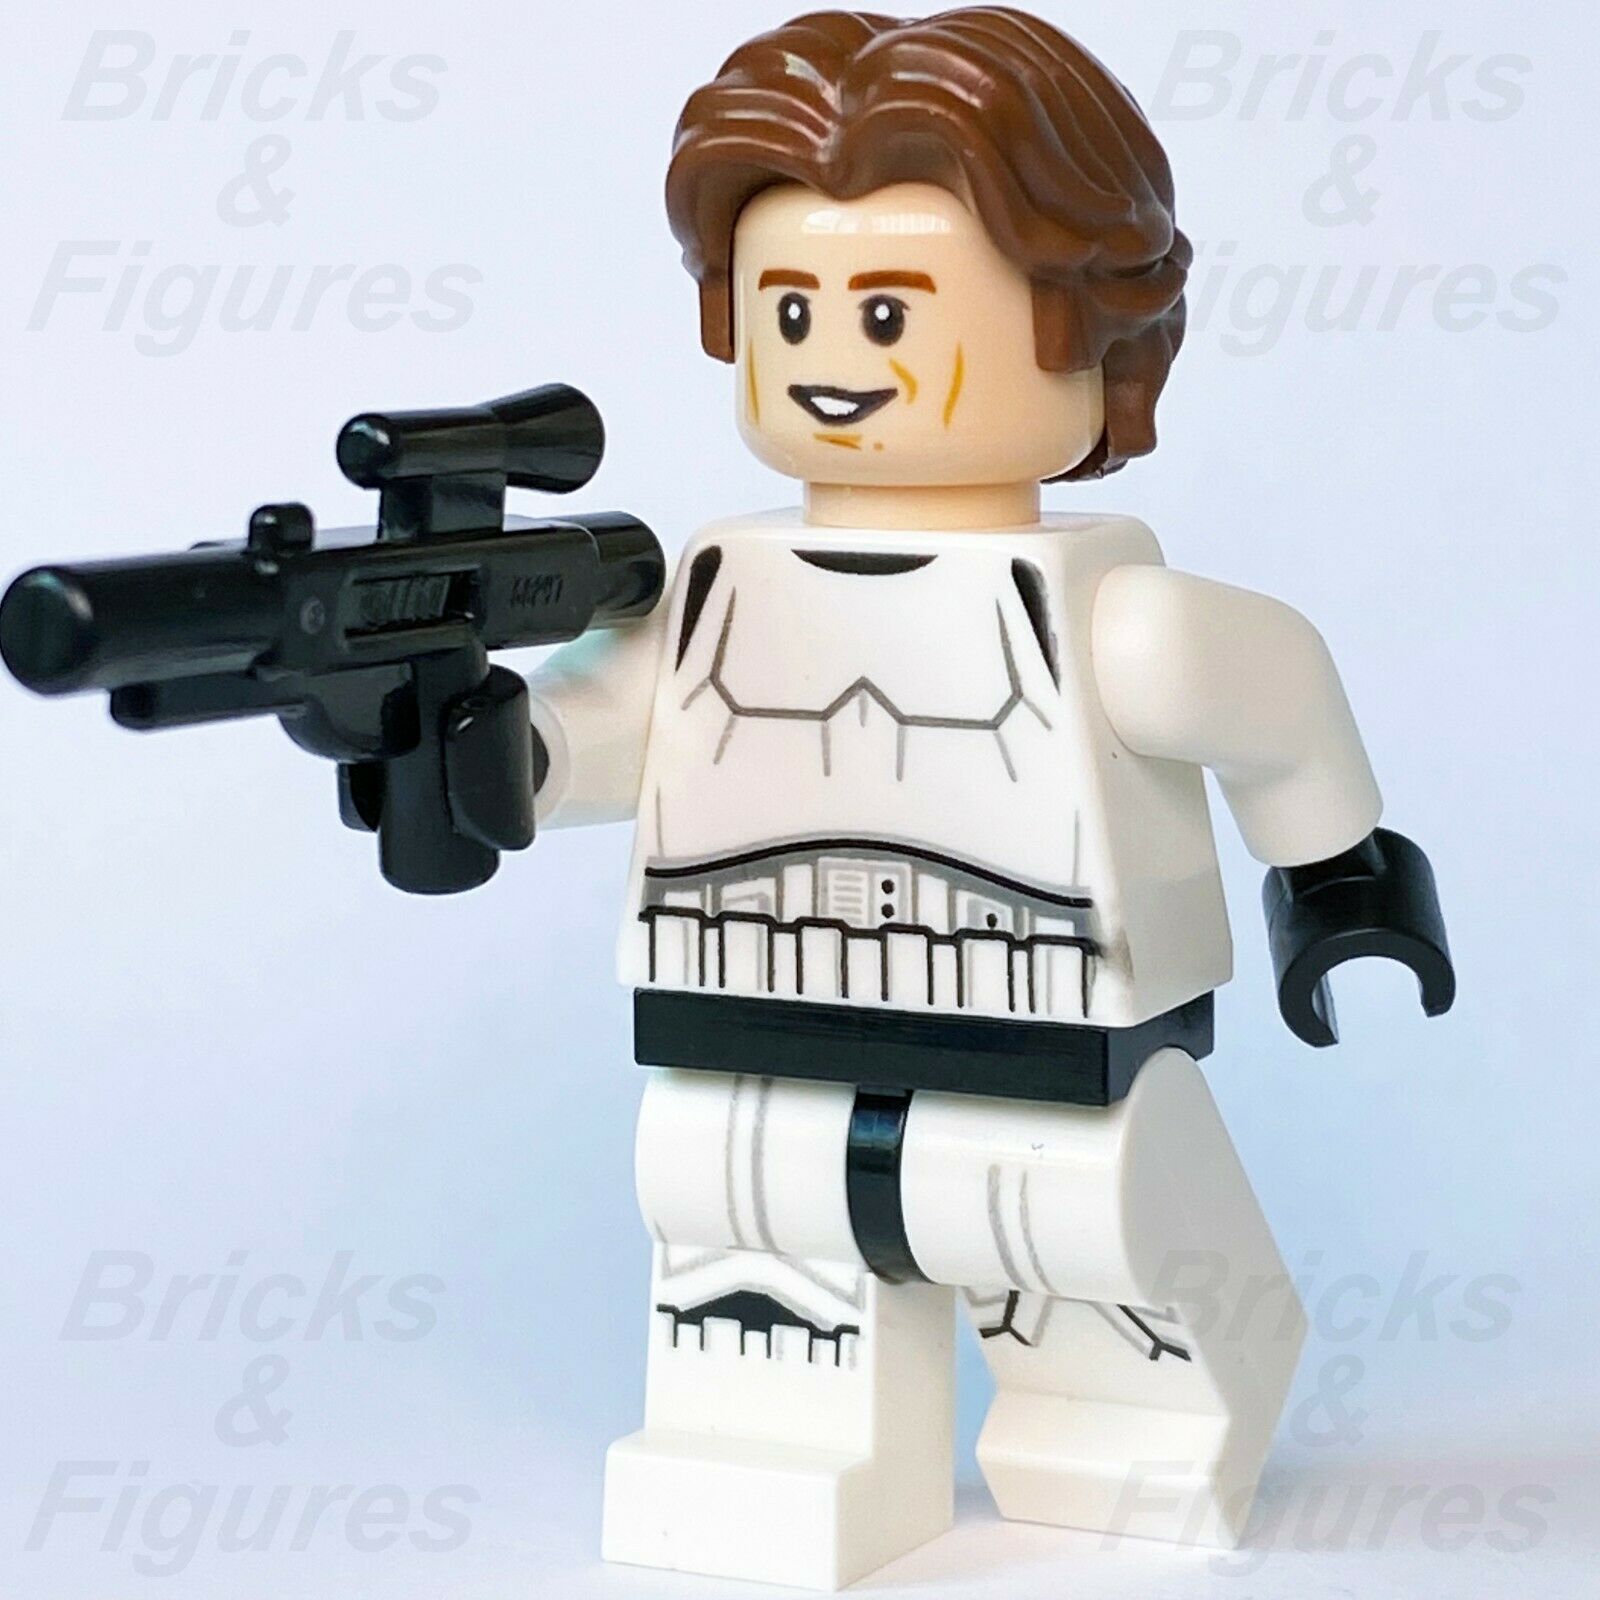 Star Wars LEGO Han Solo with Stormtrooper Outfit A New Hope Minifigure 75159 - Bricks & Figures